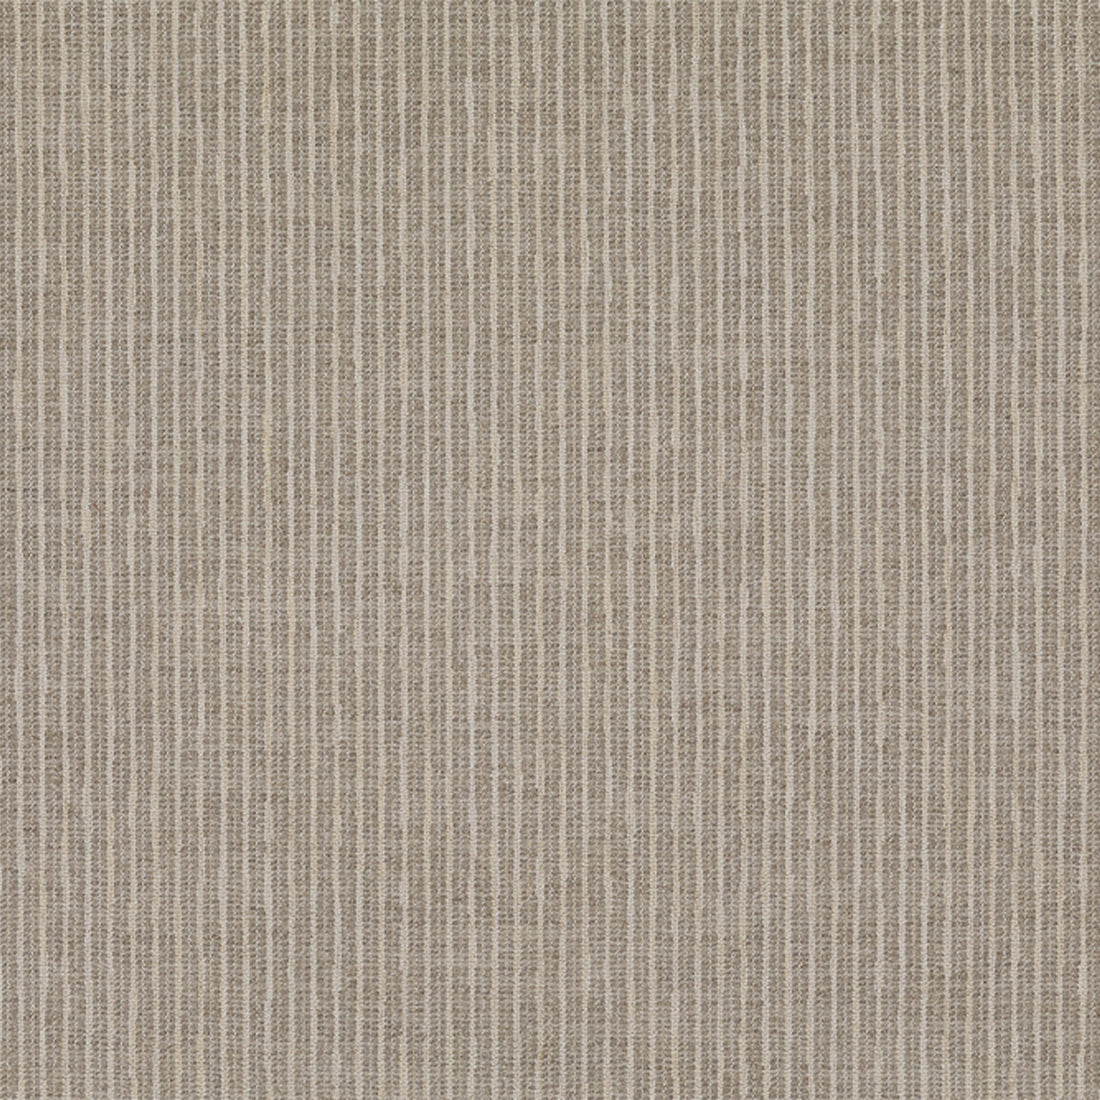 Bailey fabric in wheat color - pattern BFC-3700.16.0 - by Lee Jofa in the Blithfield collection